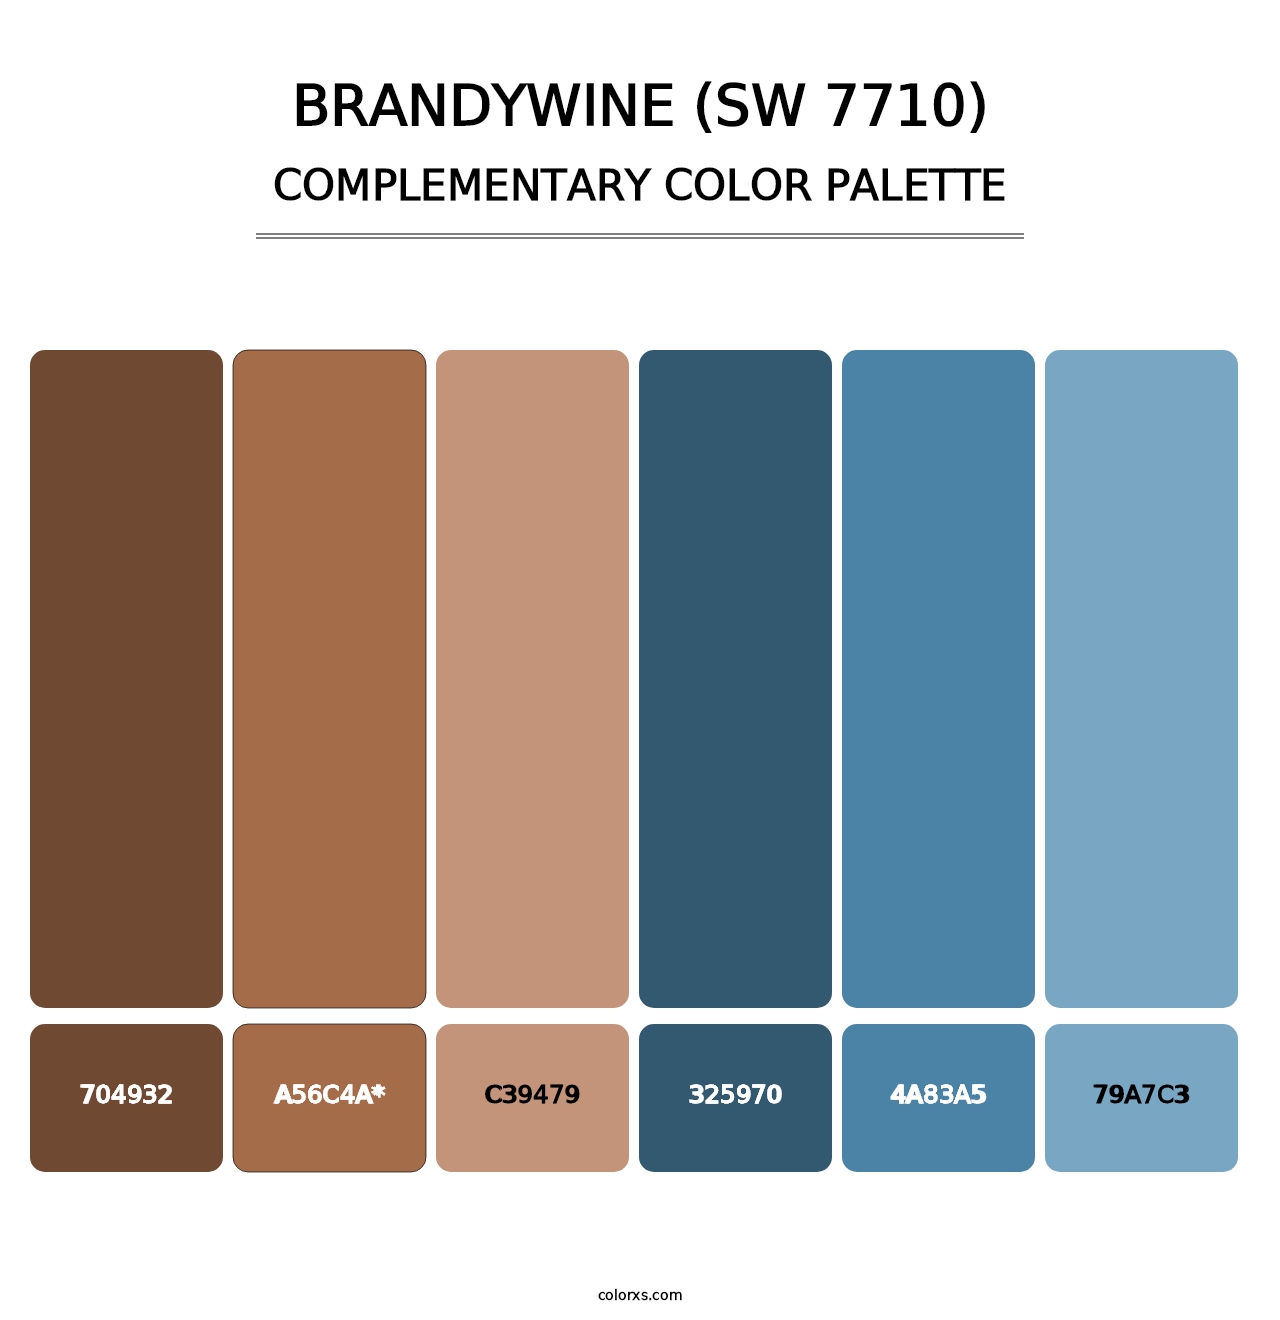 Brandywine (SW 7710) - Complementary Color Palette